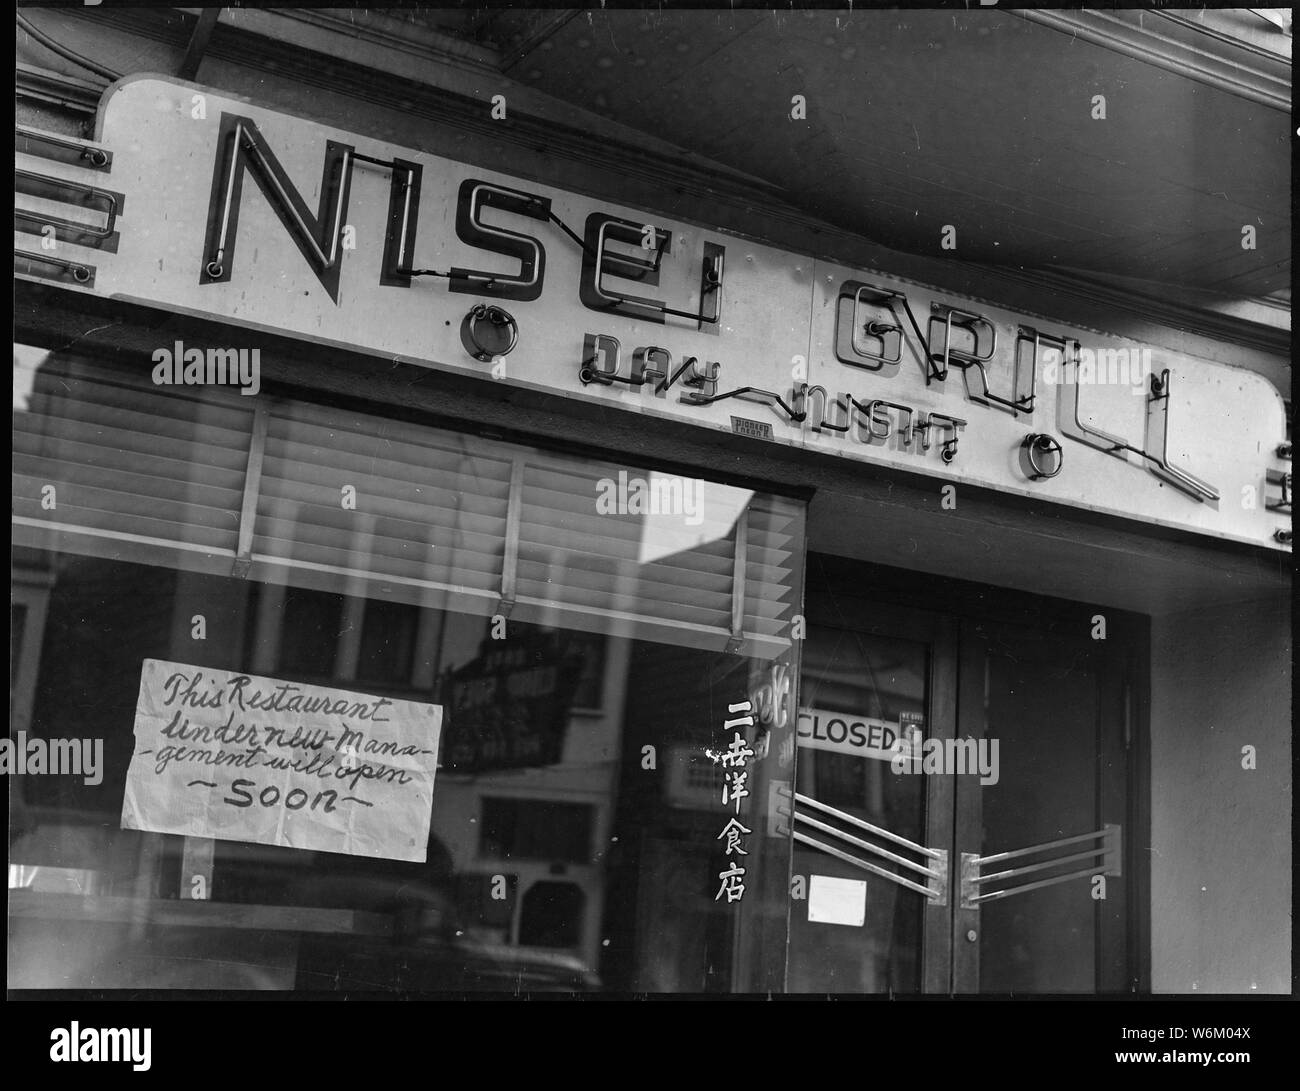 San Francisco, California. This restaurant, named Nisei after second- generation children born in . . .; Scope and content:  The full caption for this photograph reads: San Francisco, California. This restaurant, named Nisei after second- generation children born in this country to Japanese immigrants was closed prior to evacuation of residents of Japanese ancestry; and, according to sign in the window, was scheduled to re- open under new management. Evacuees will be housed at War Relocation Authority centers for [the] duration. Stock Photo